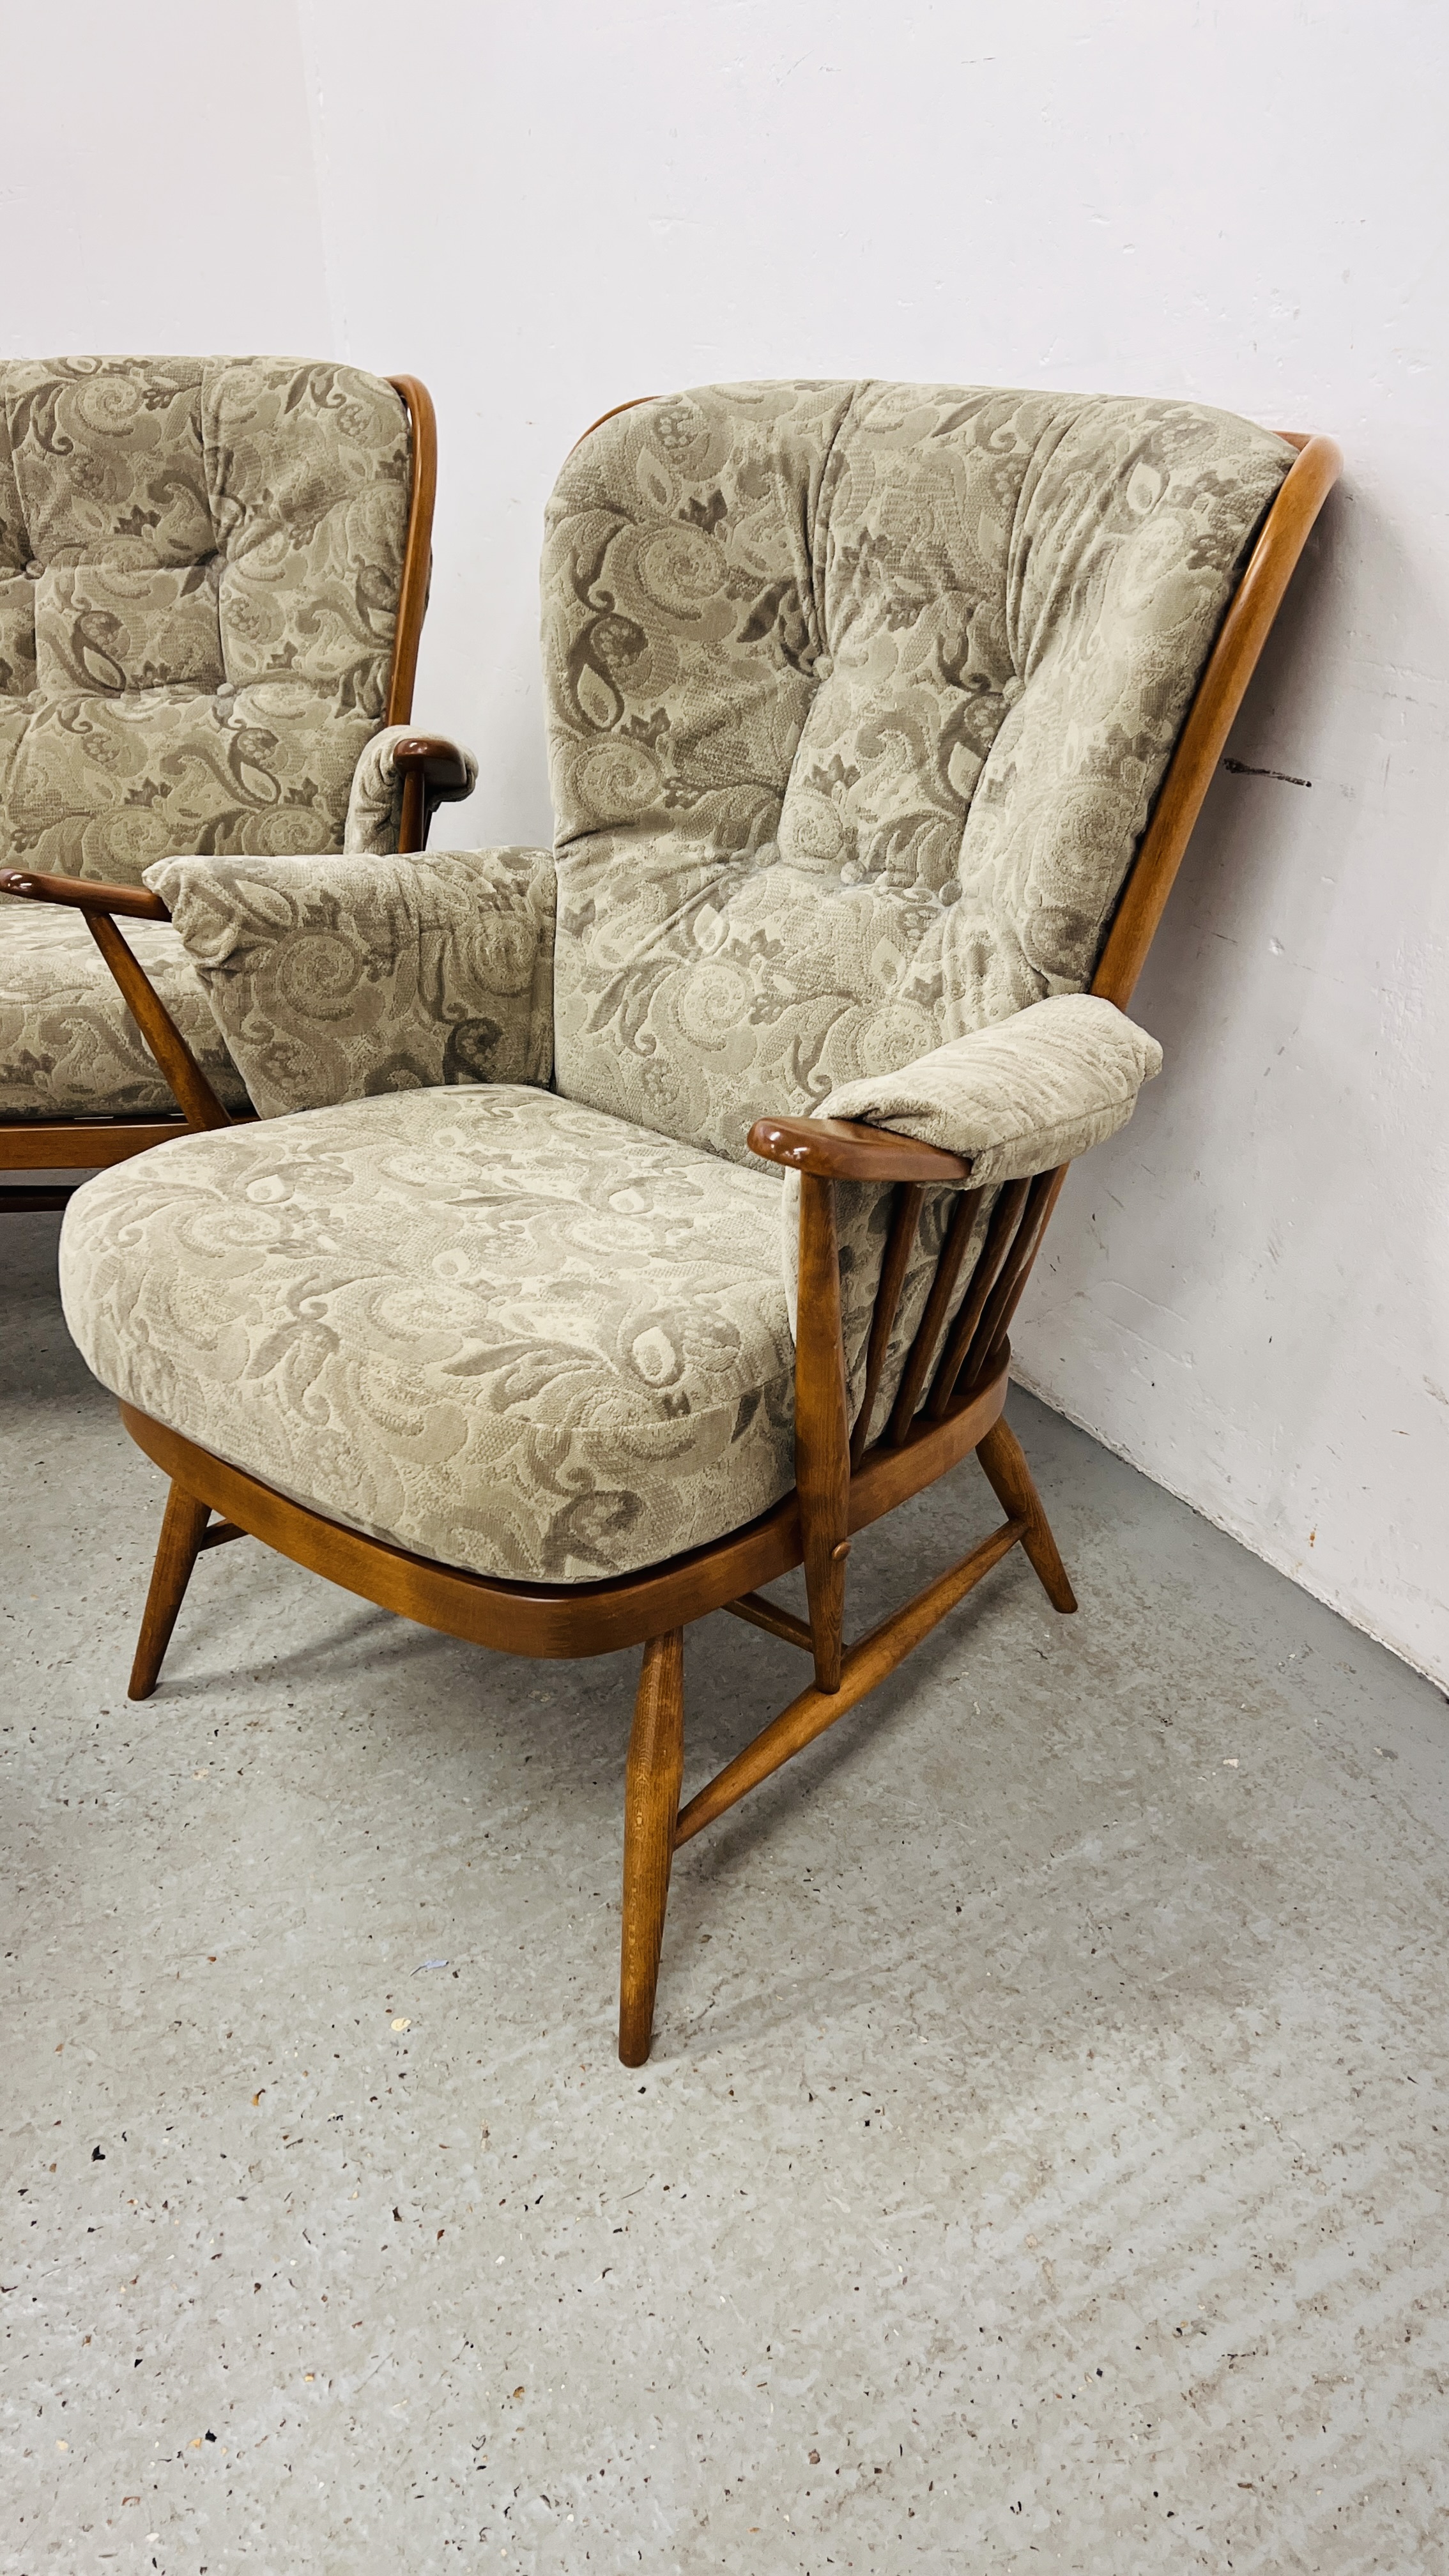 AN ERCOL "GOLDEN DAWN" FINISH COTTAGE THREE PIECE LOUNGE SUITE WITH MATCHING FOOTSTOOL - TRADE ONLY. - Image 2 of 11